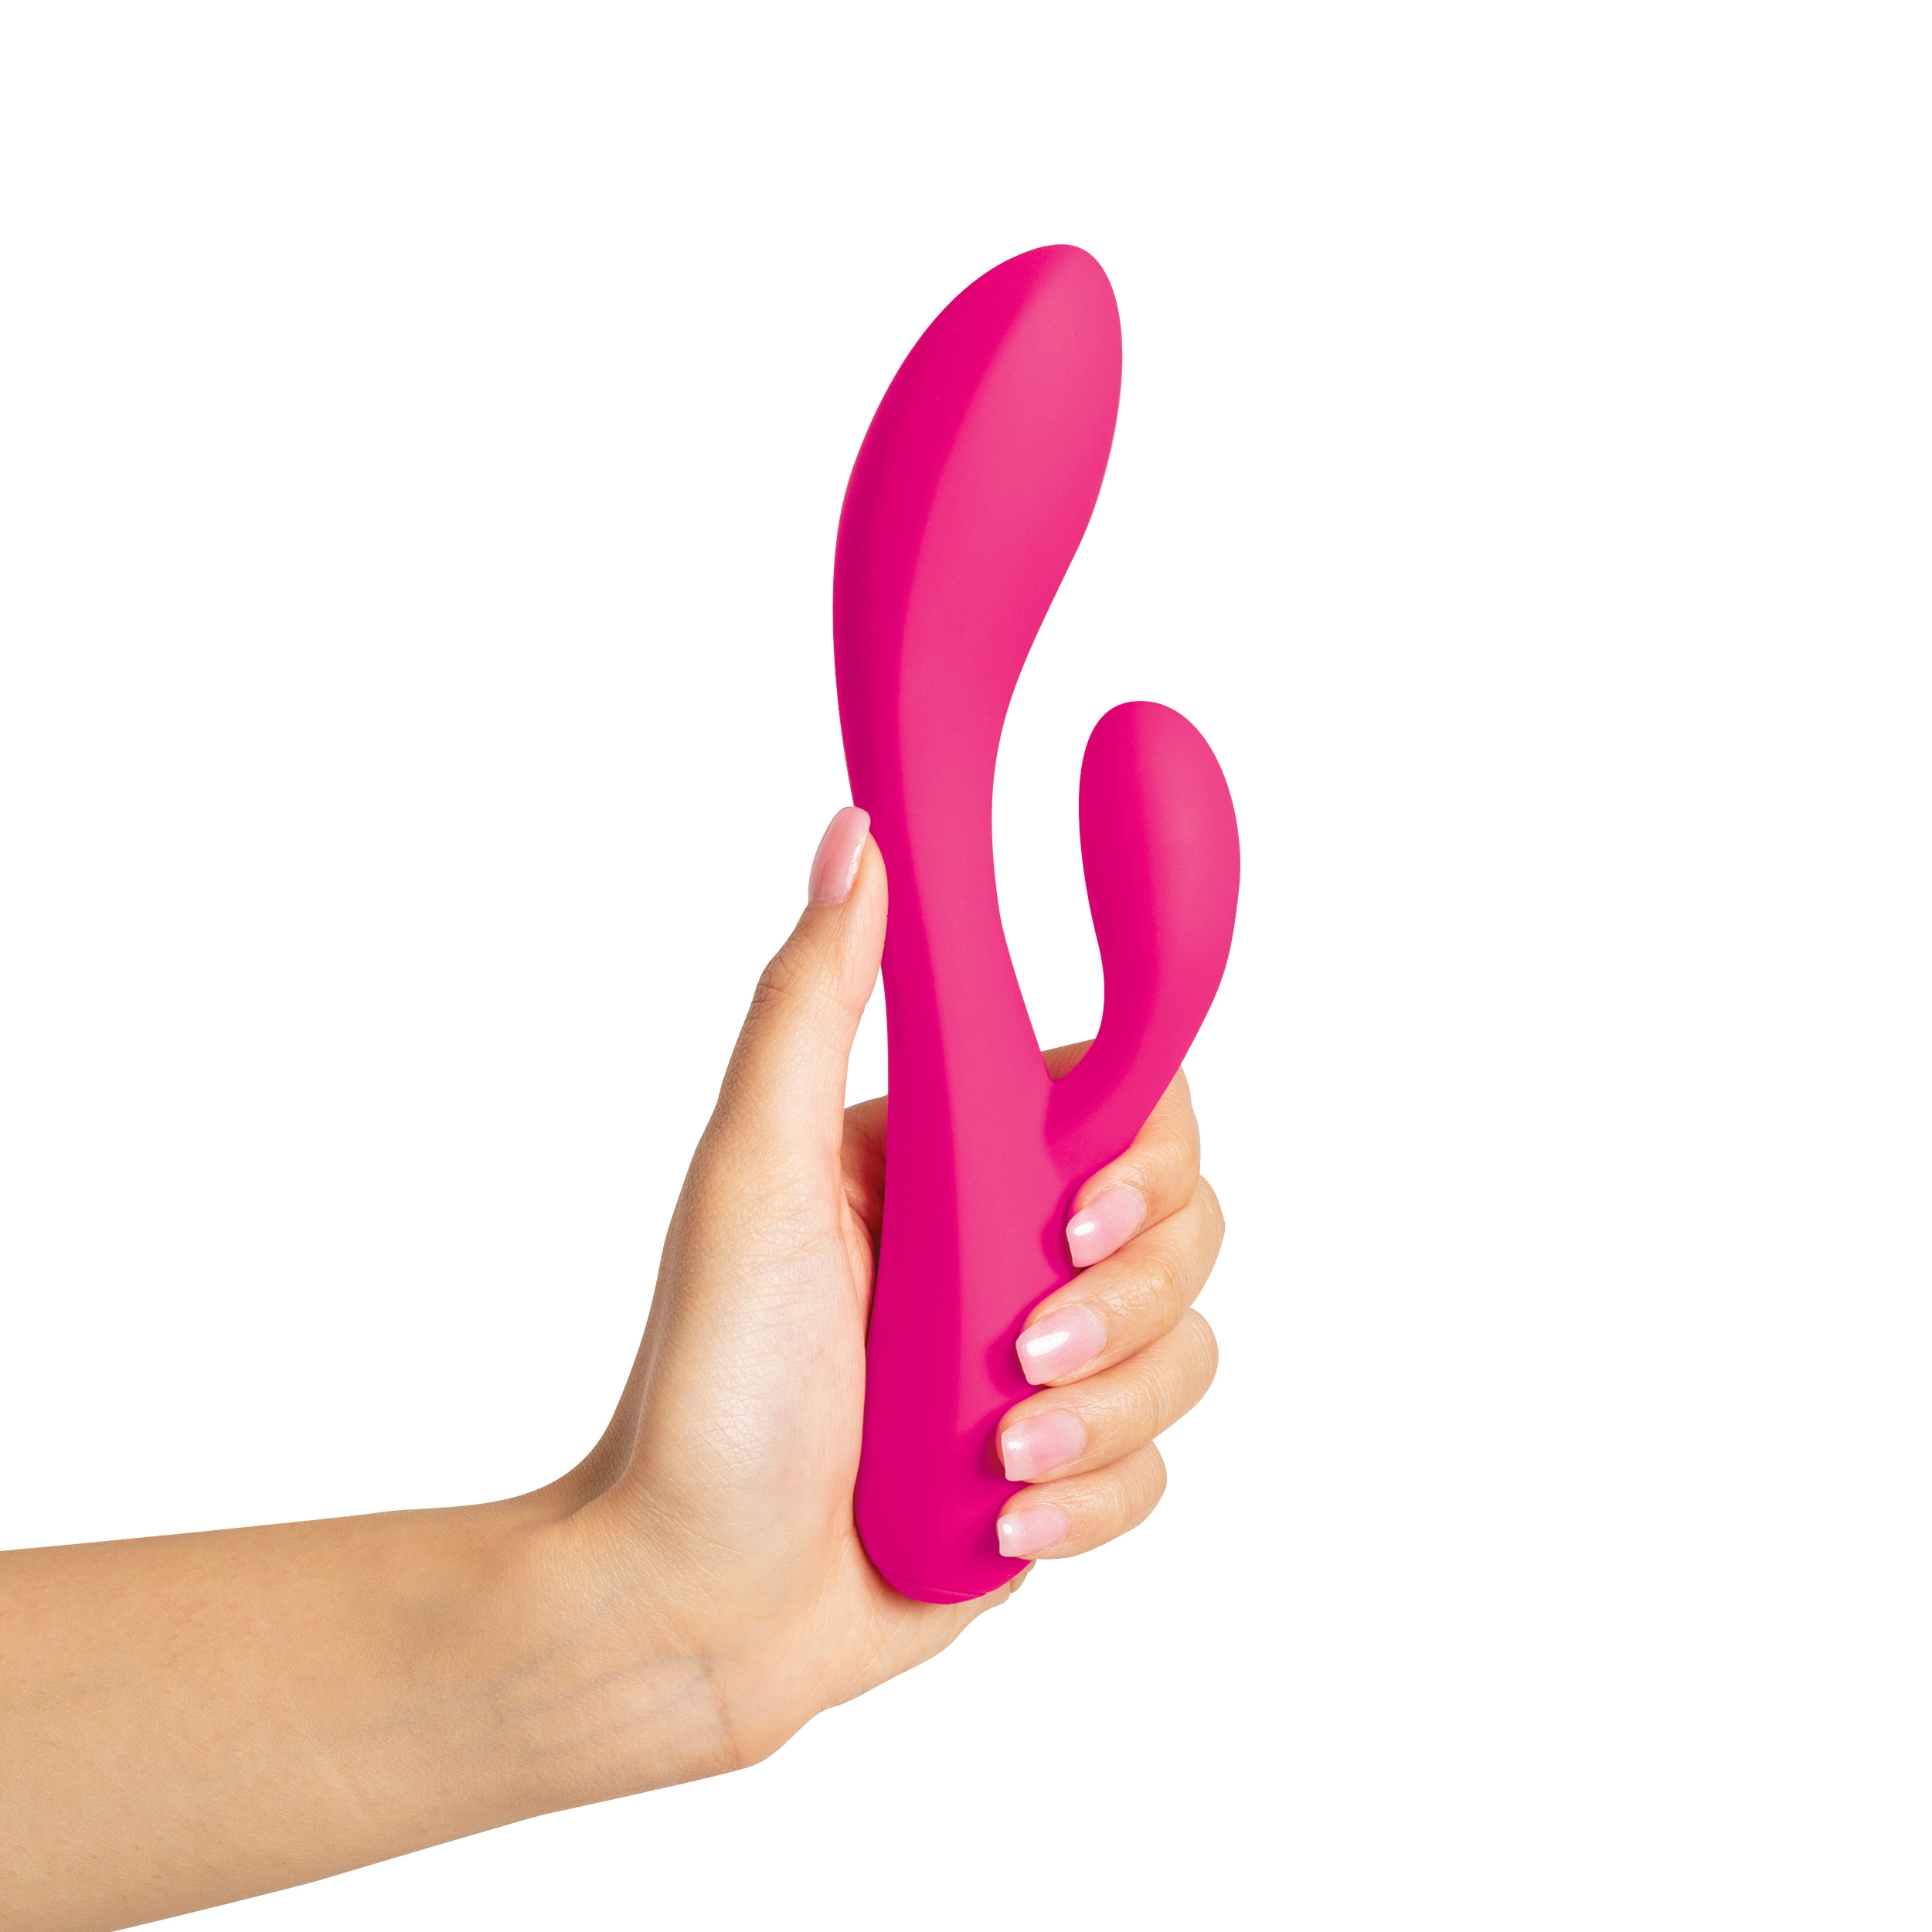 Plus One Waterproof Rechargeable Dual Vibrating High Quality Body Safe  Silicone Massager